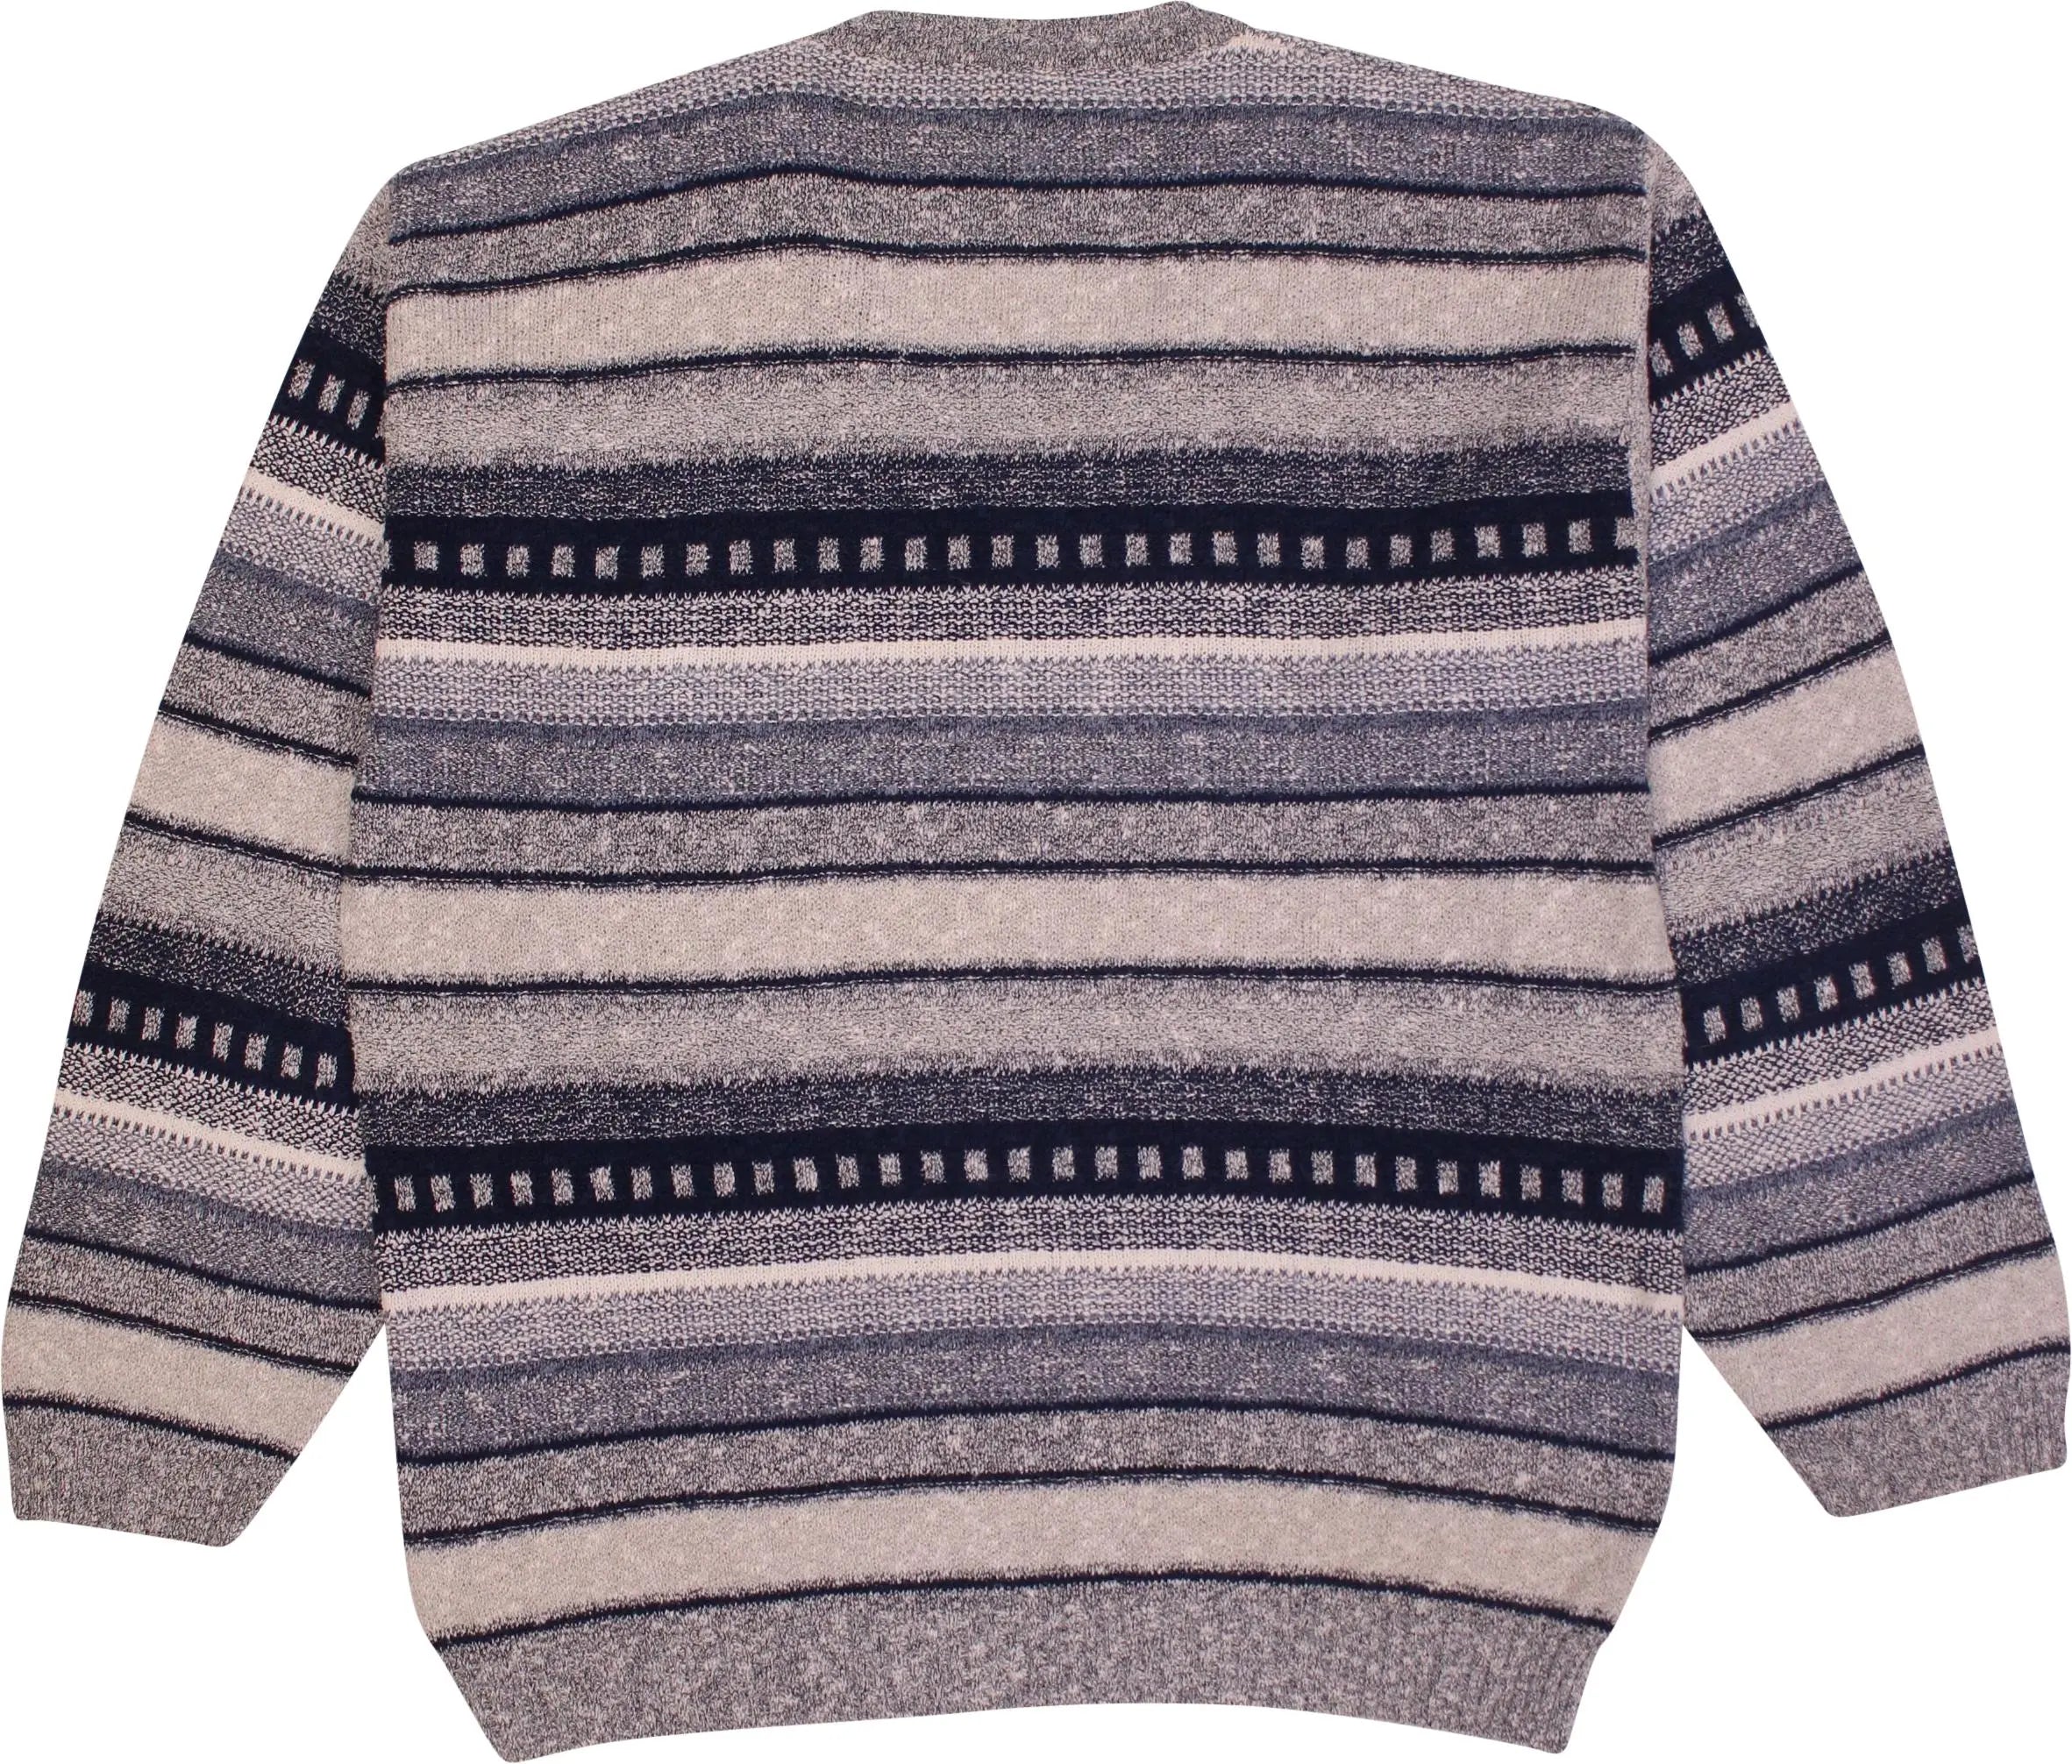 Enzo Goti - 90s Knitted Sweater by Enzo Goti- ThriftTale.com - Vintage and second handclothing